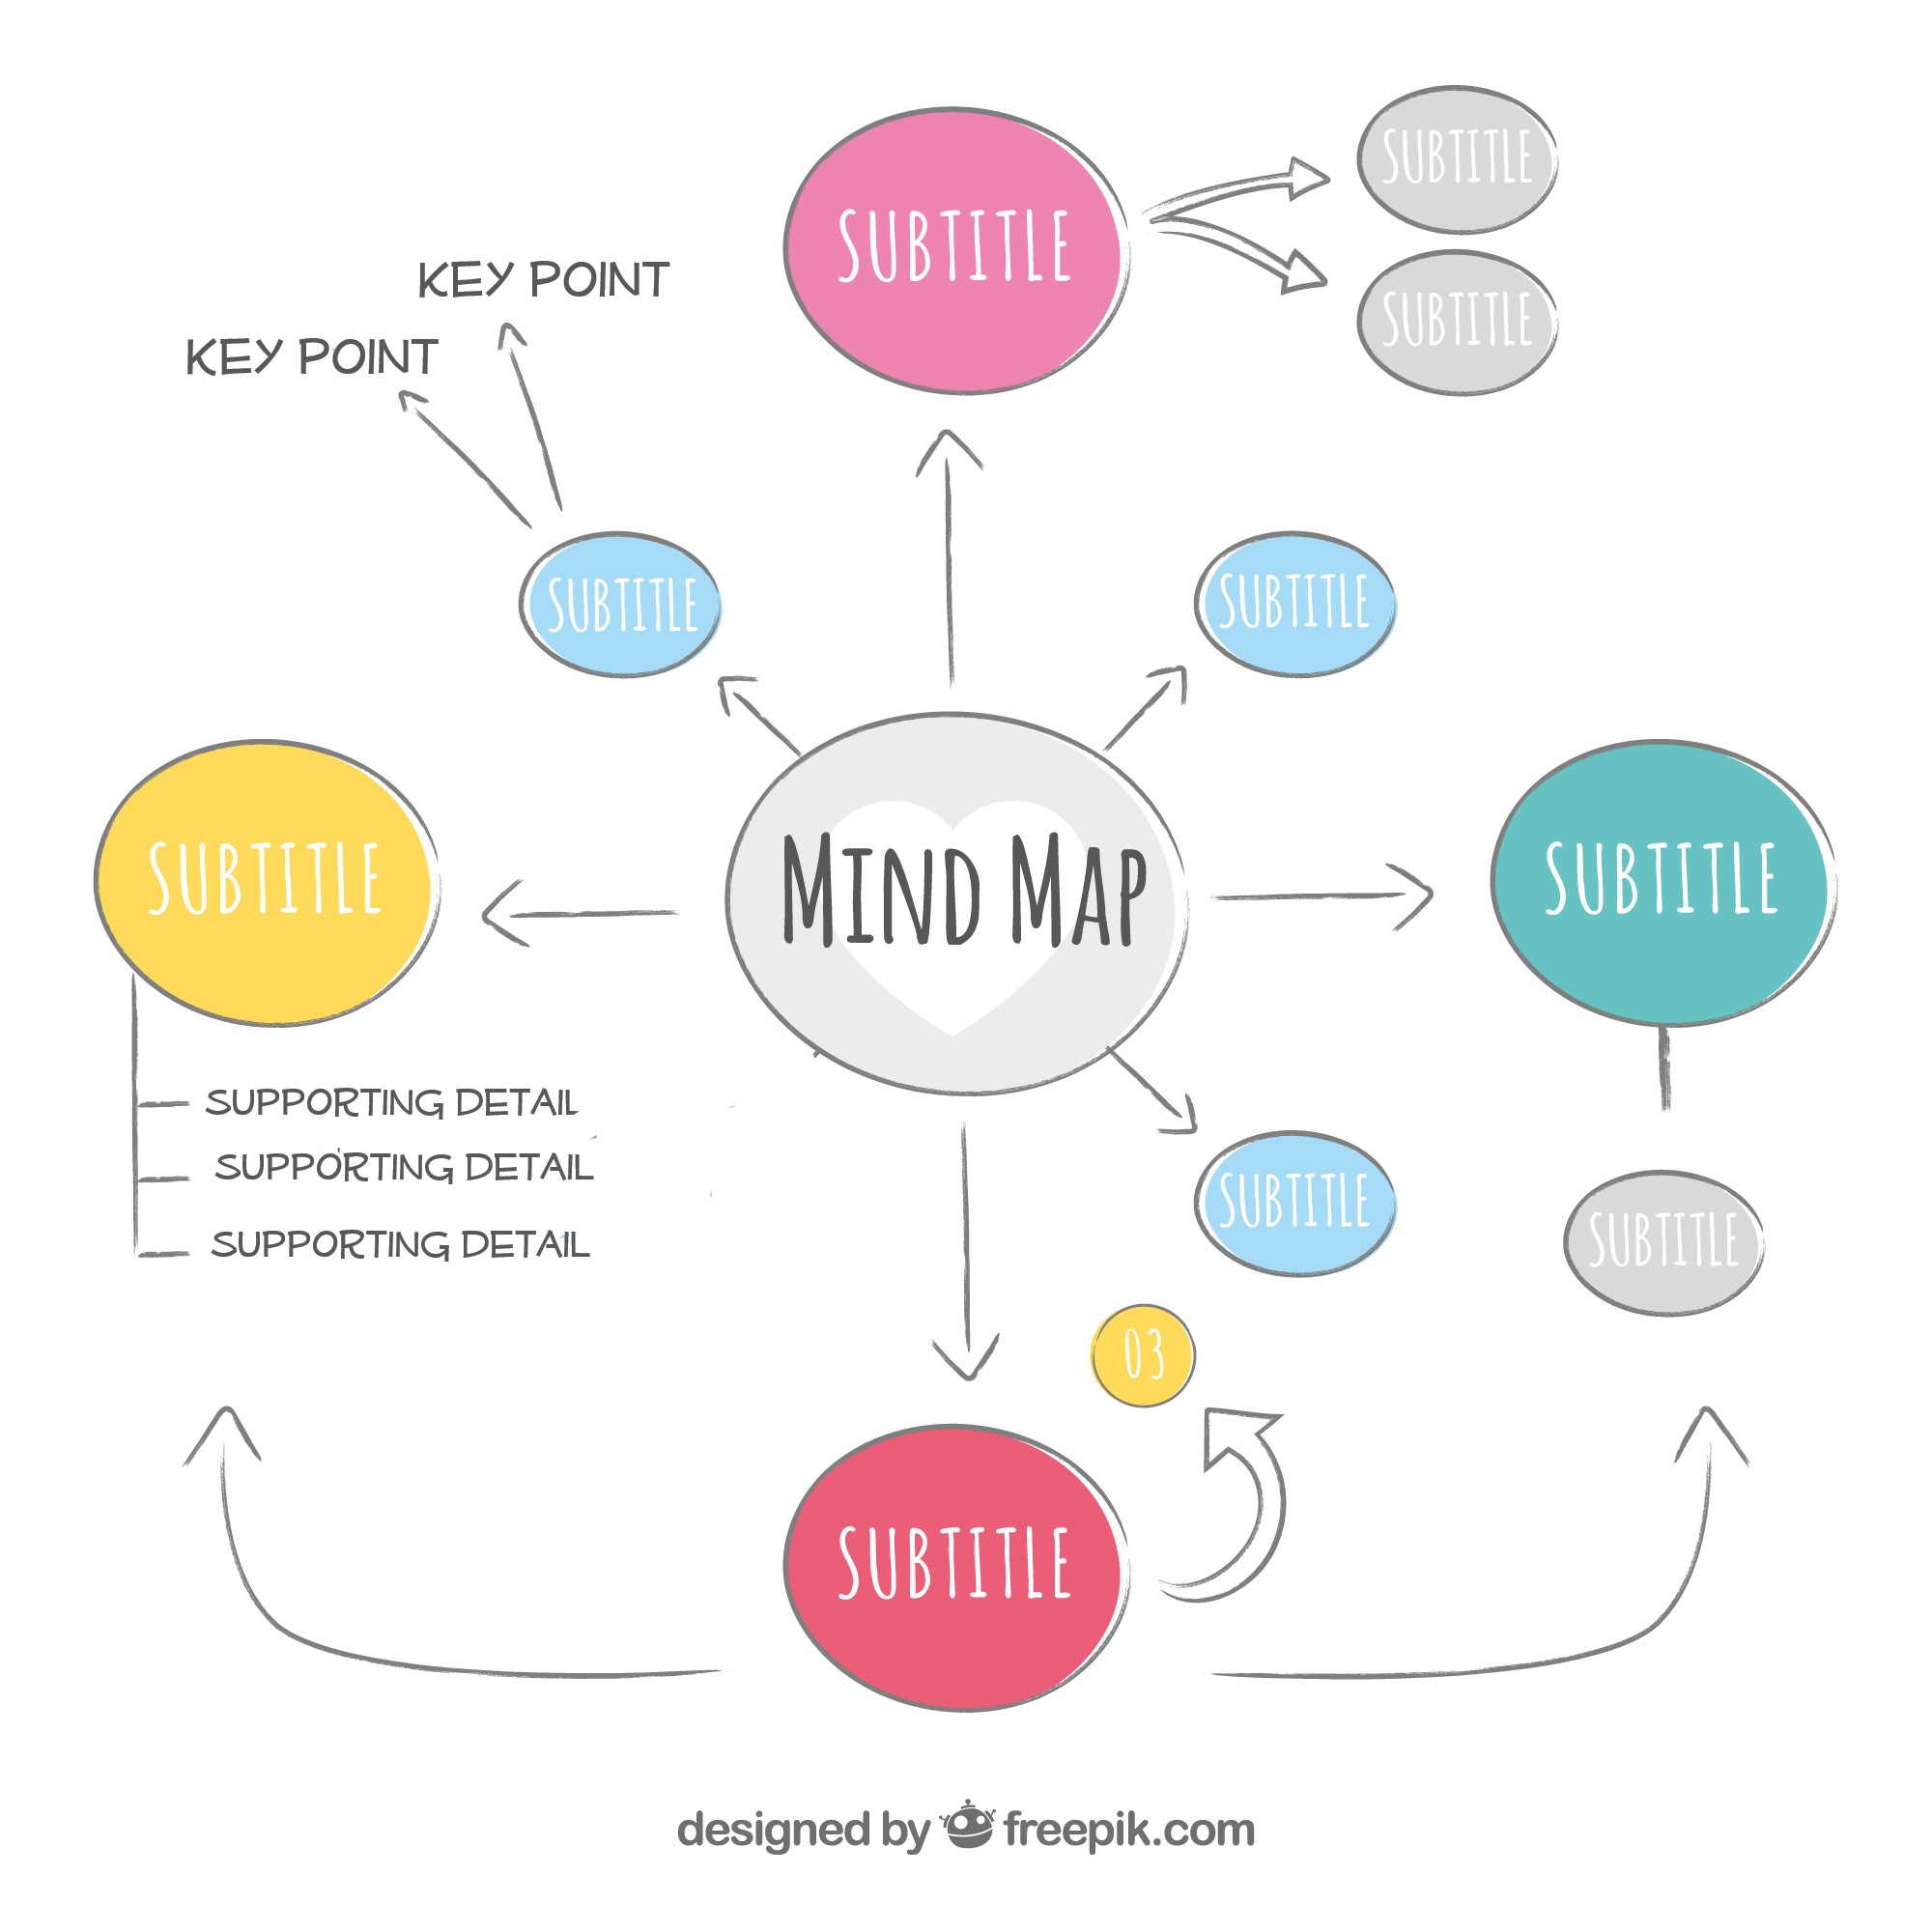 mind mapping like mindly